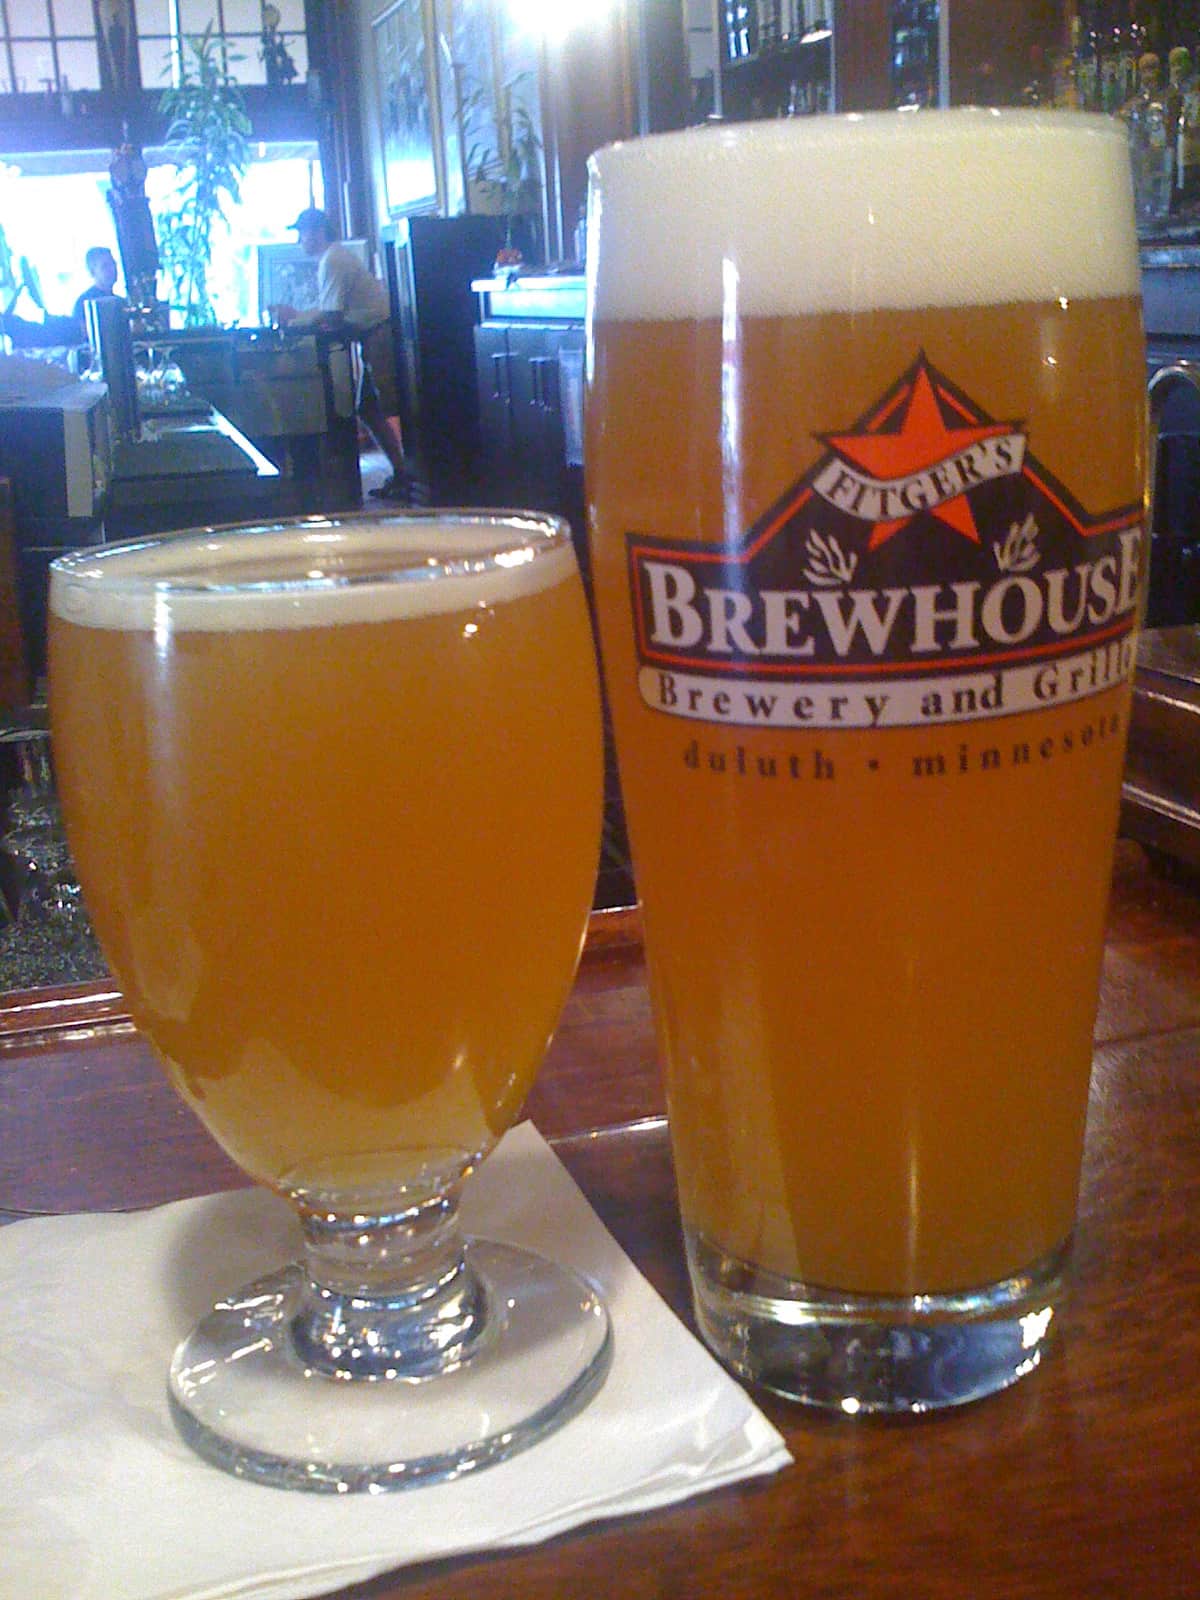 Town Hall Brewery & Fitger’s Brewhouse Hefeweizen